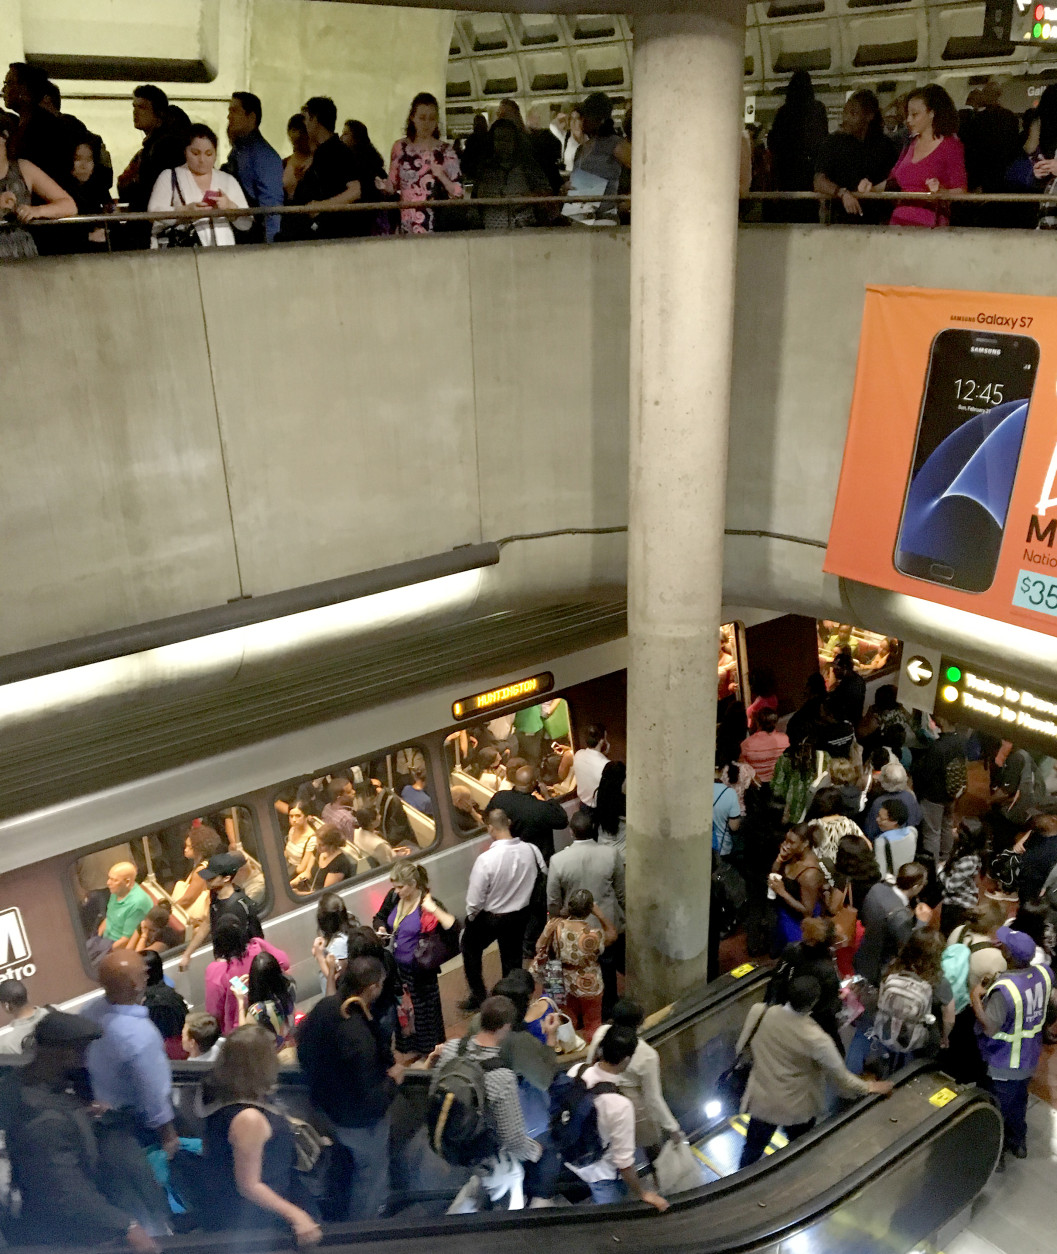 Residual crowding persists at the Gallery Place Metrorail station, where track debris triggered delays and forced inbound and outbound trains to share a single track on Thursday, June 23, 2016. (WTOP/Tiffany Arnold)